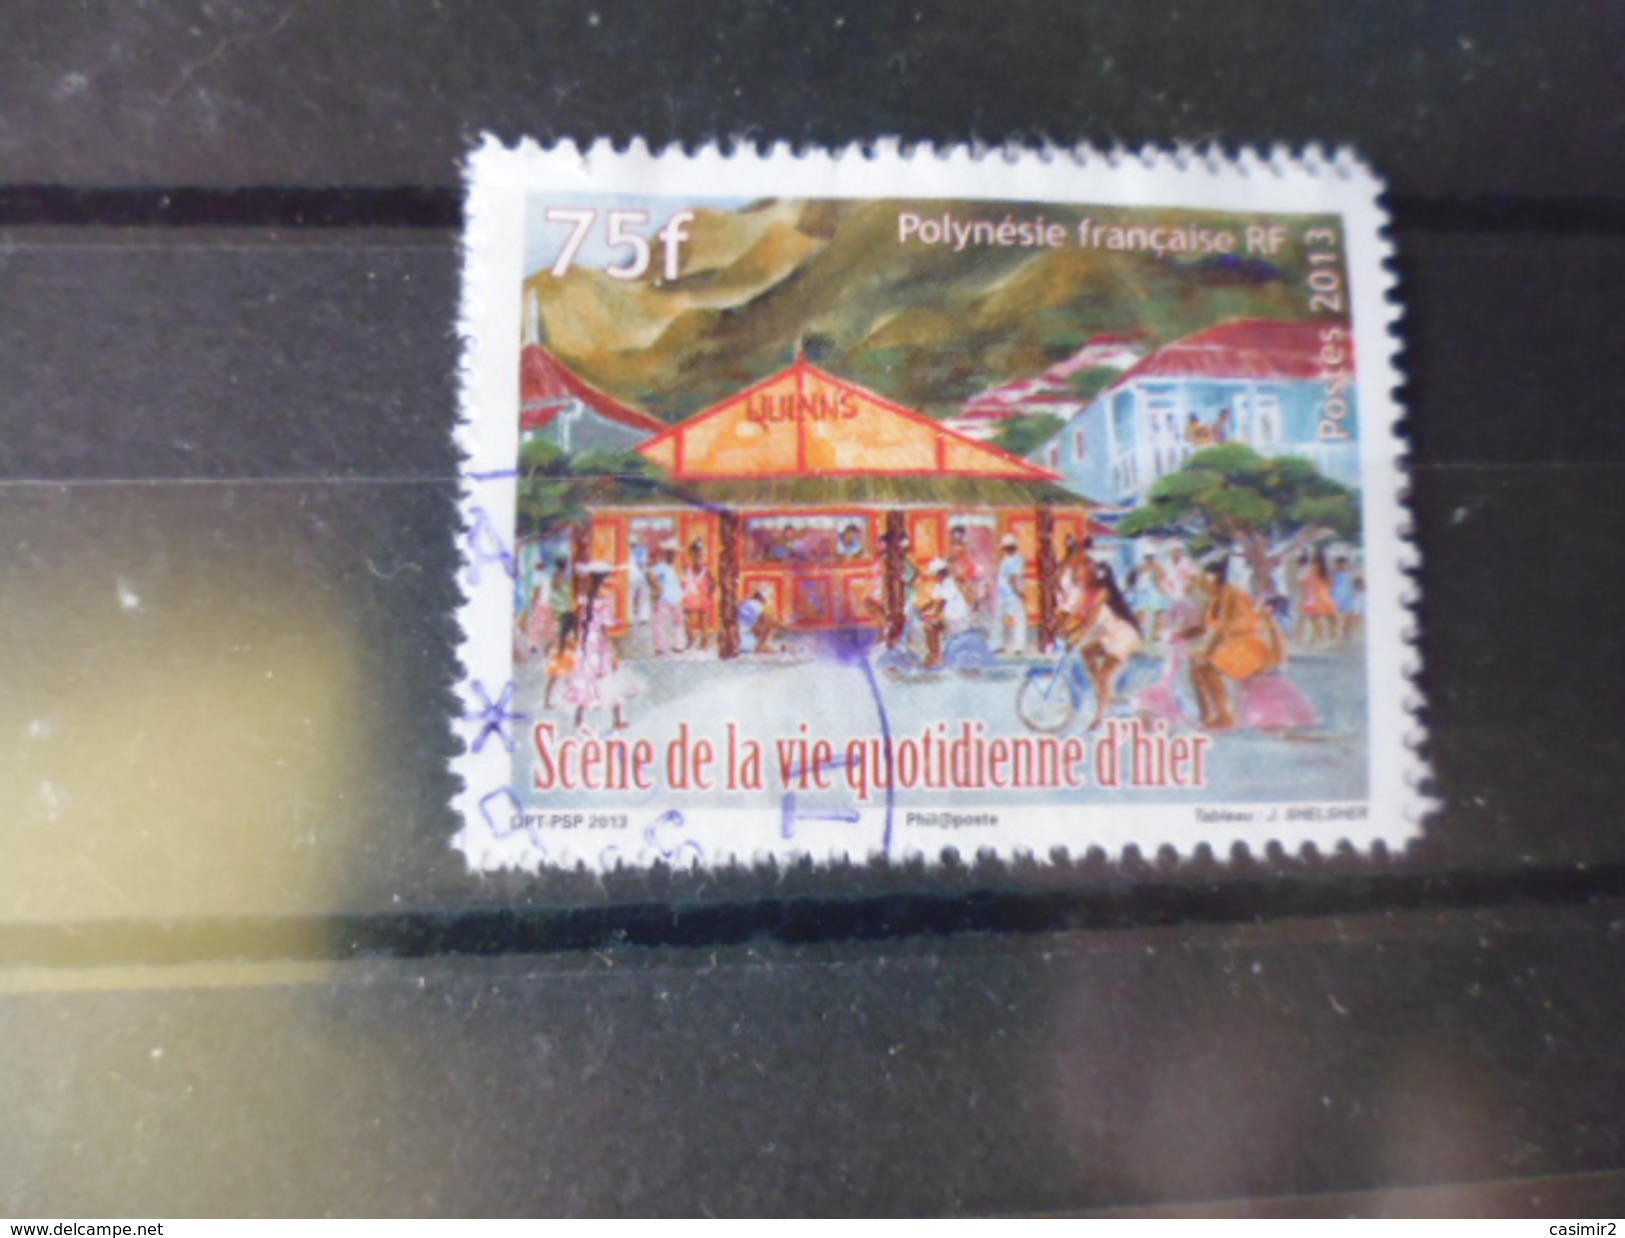 POLYNESIE FRANCAISE TIMBRE OBLITERE YVERT N°1013 - Used Stamps